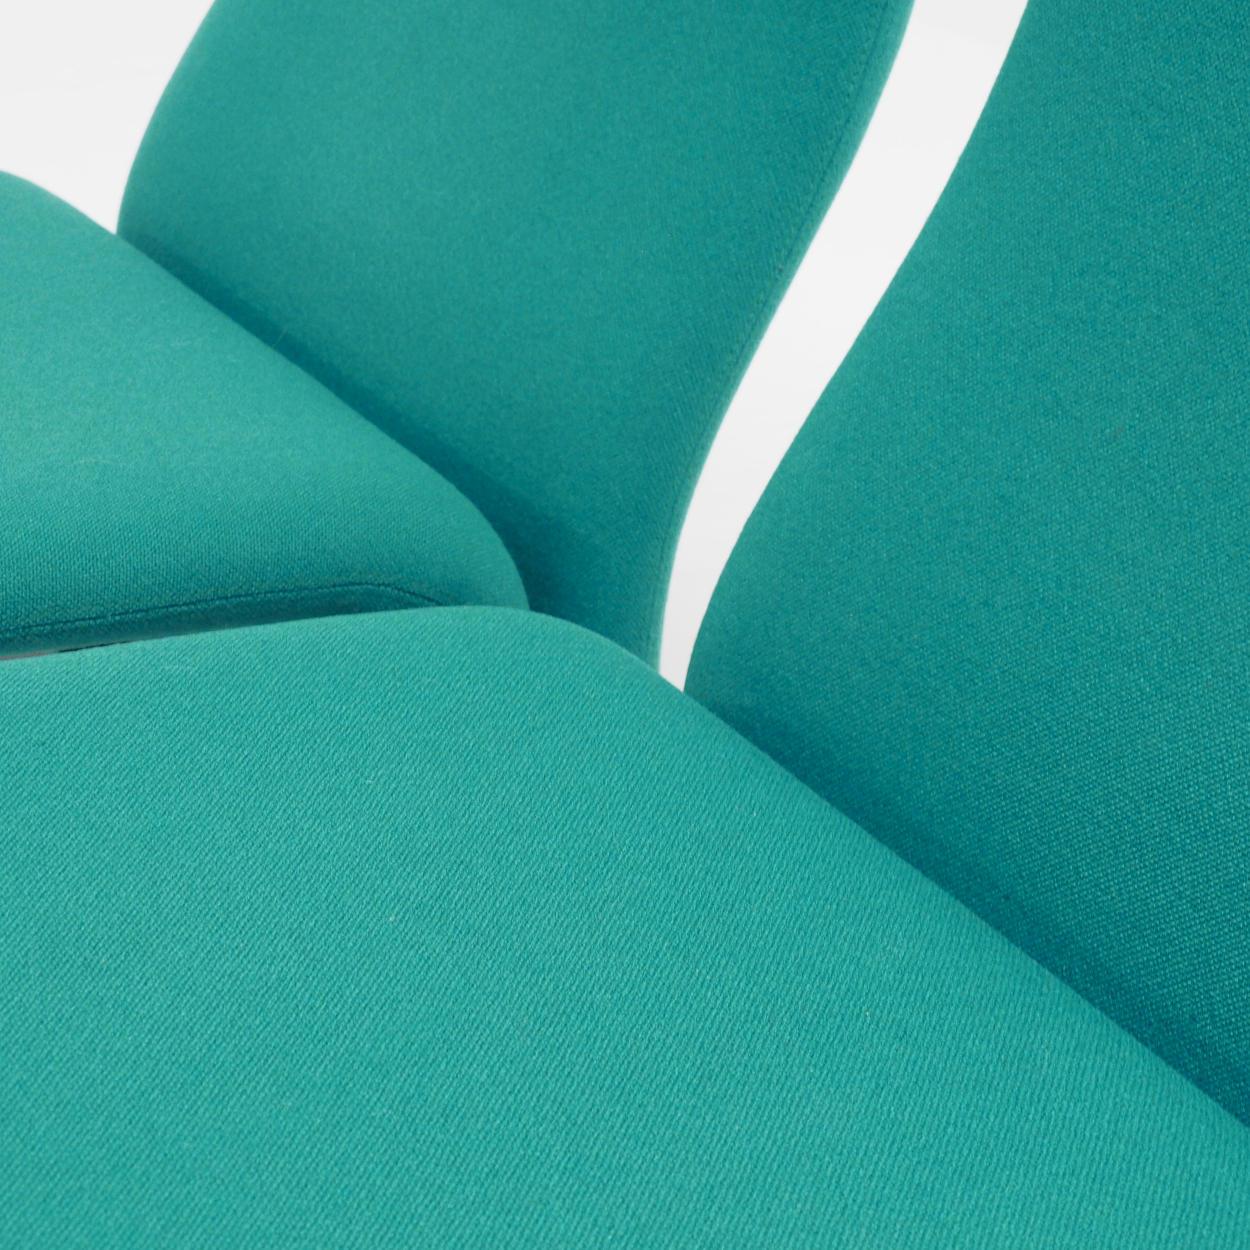 Fabric Set of F-780 “Concorde” Chairs by Pierre Paulin for Artifort